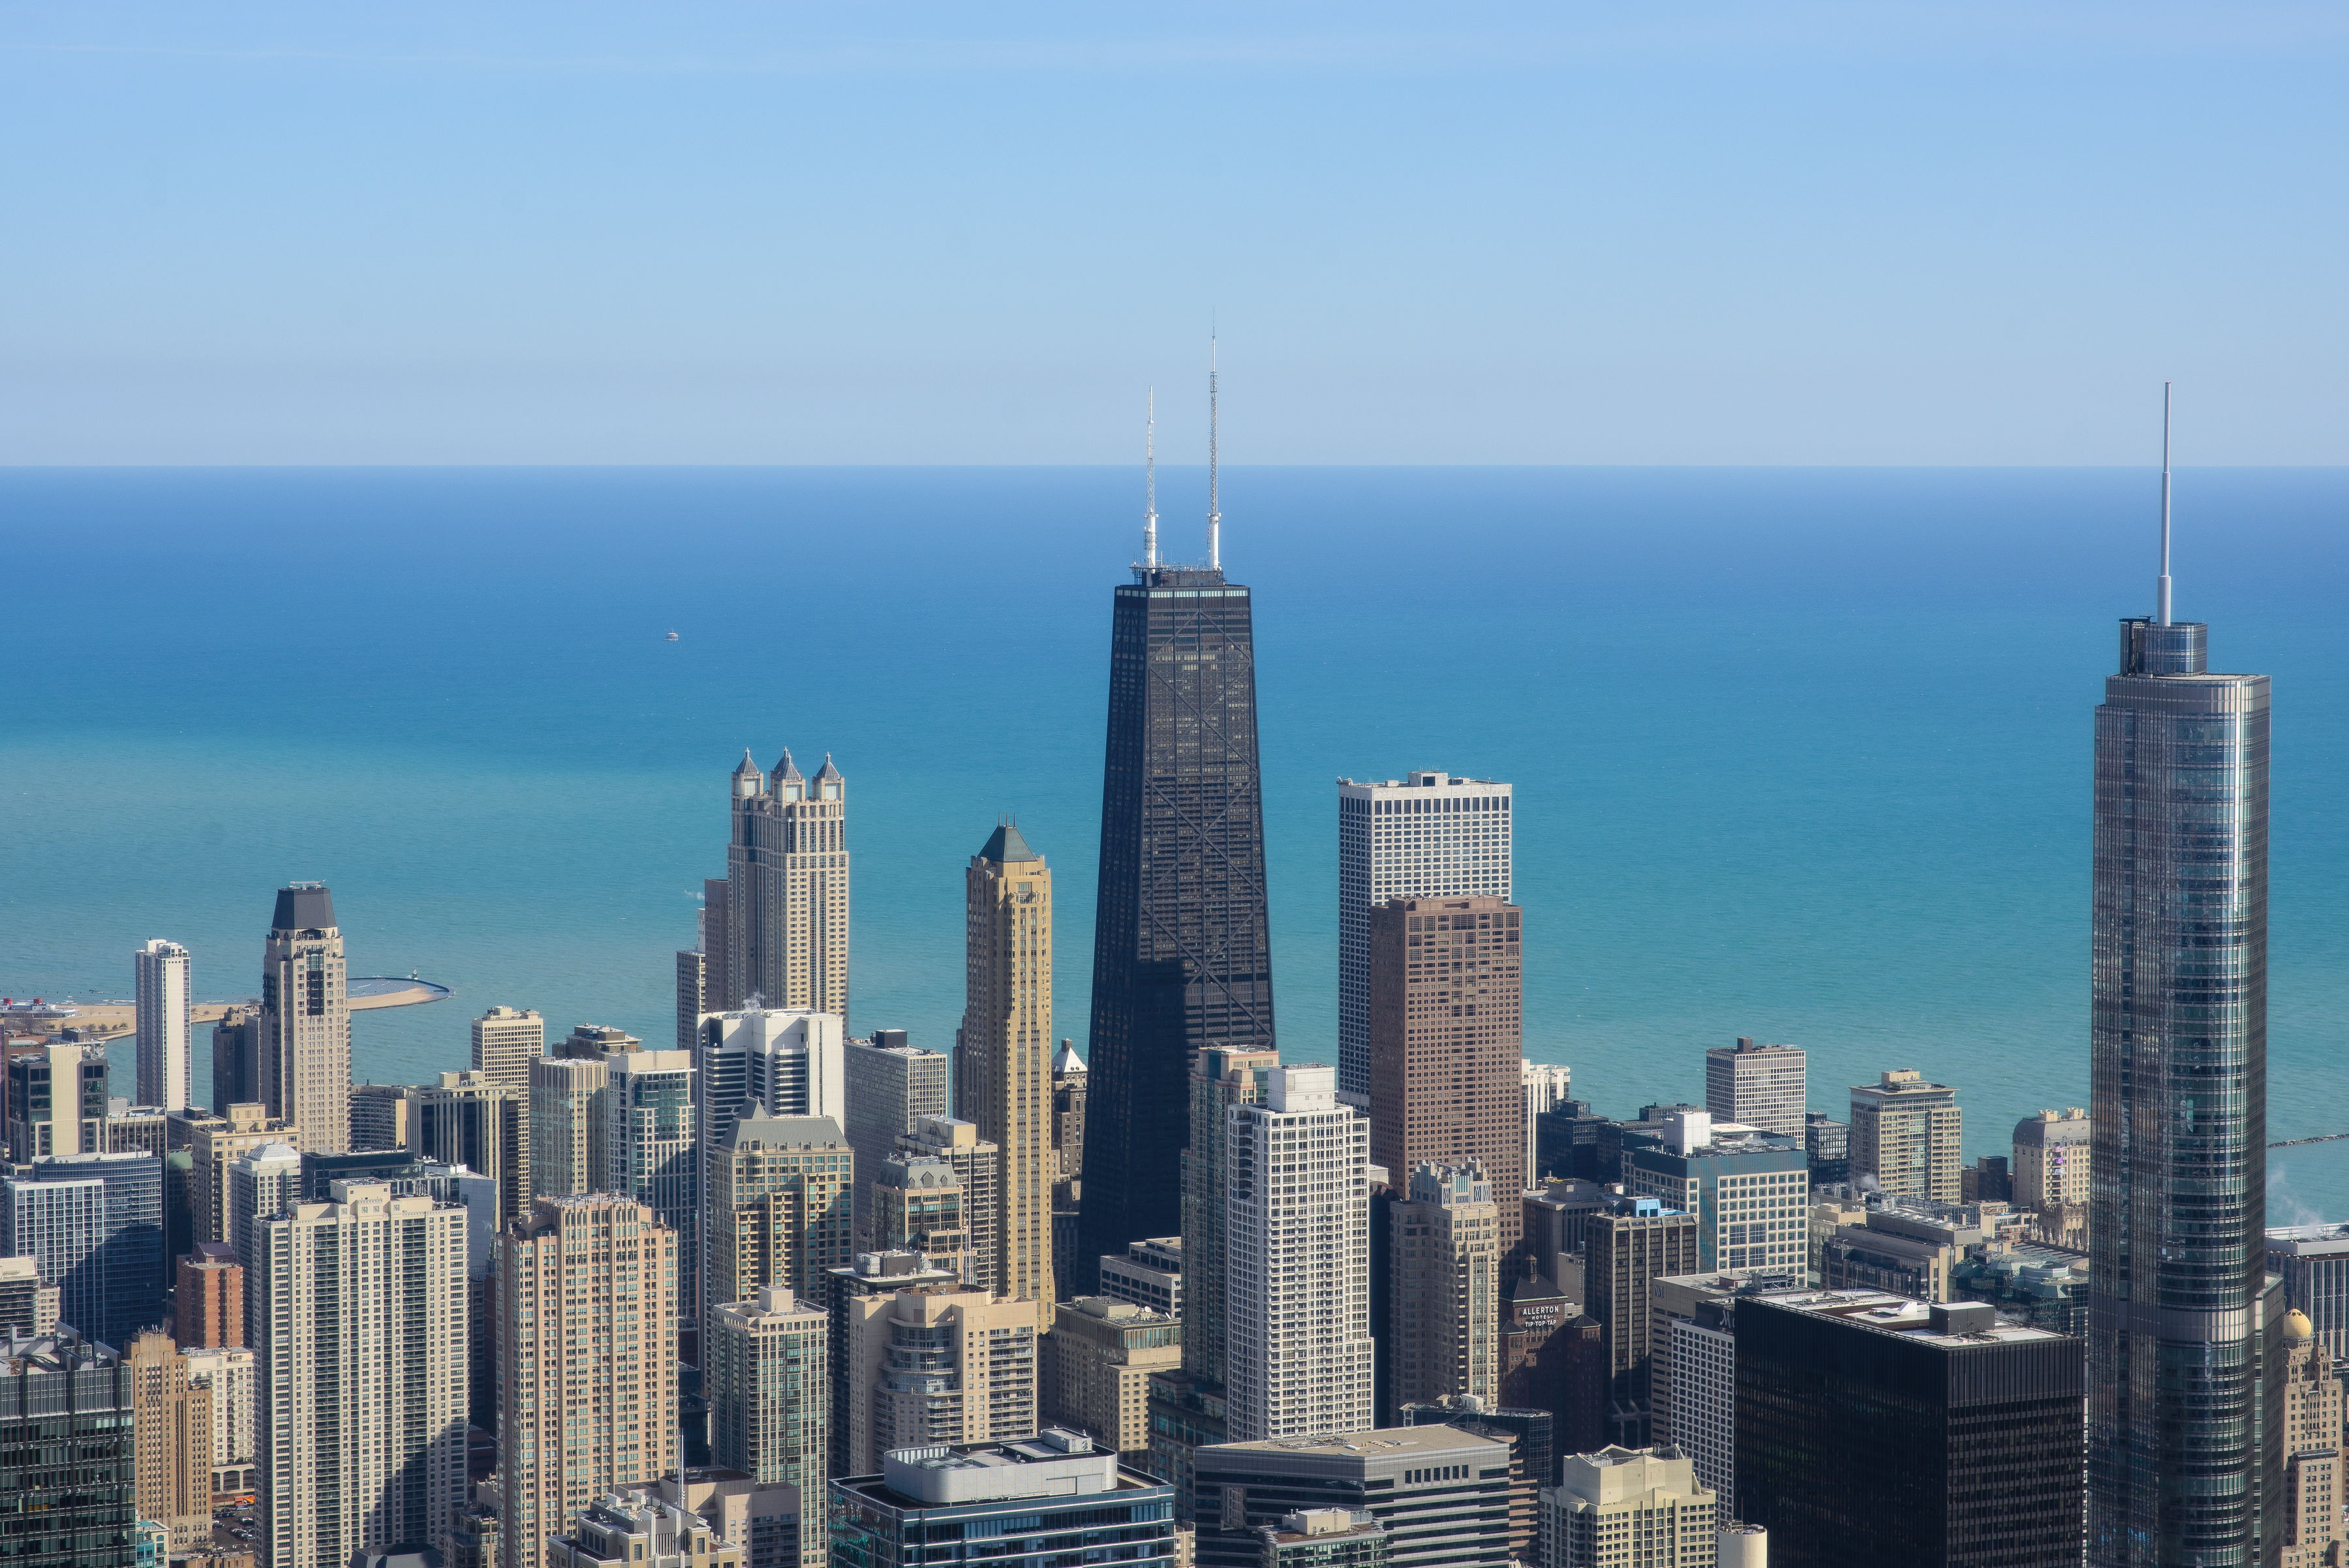 Chicago is waiting for you! Enjoy its culture and gastronomy on the marathon weekend